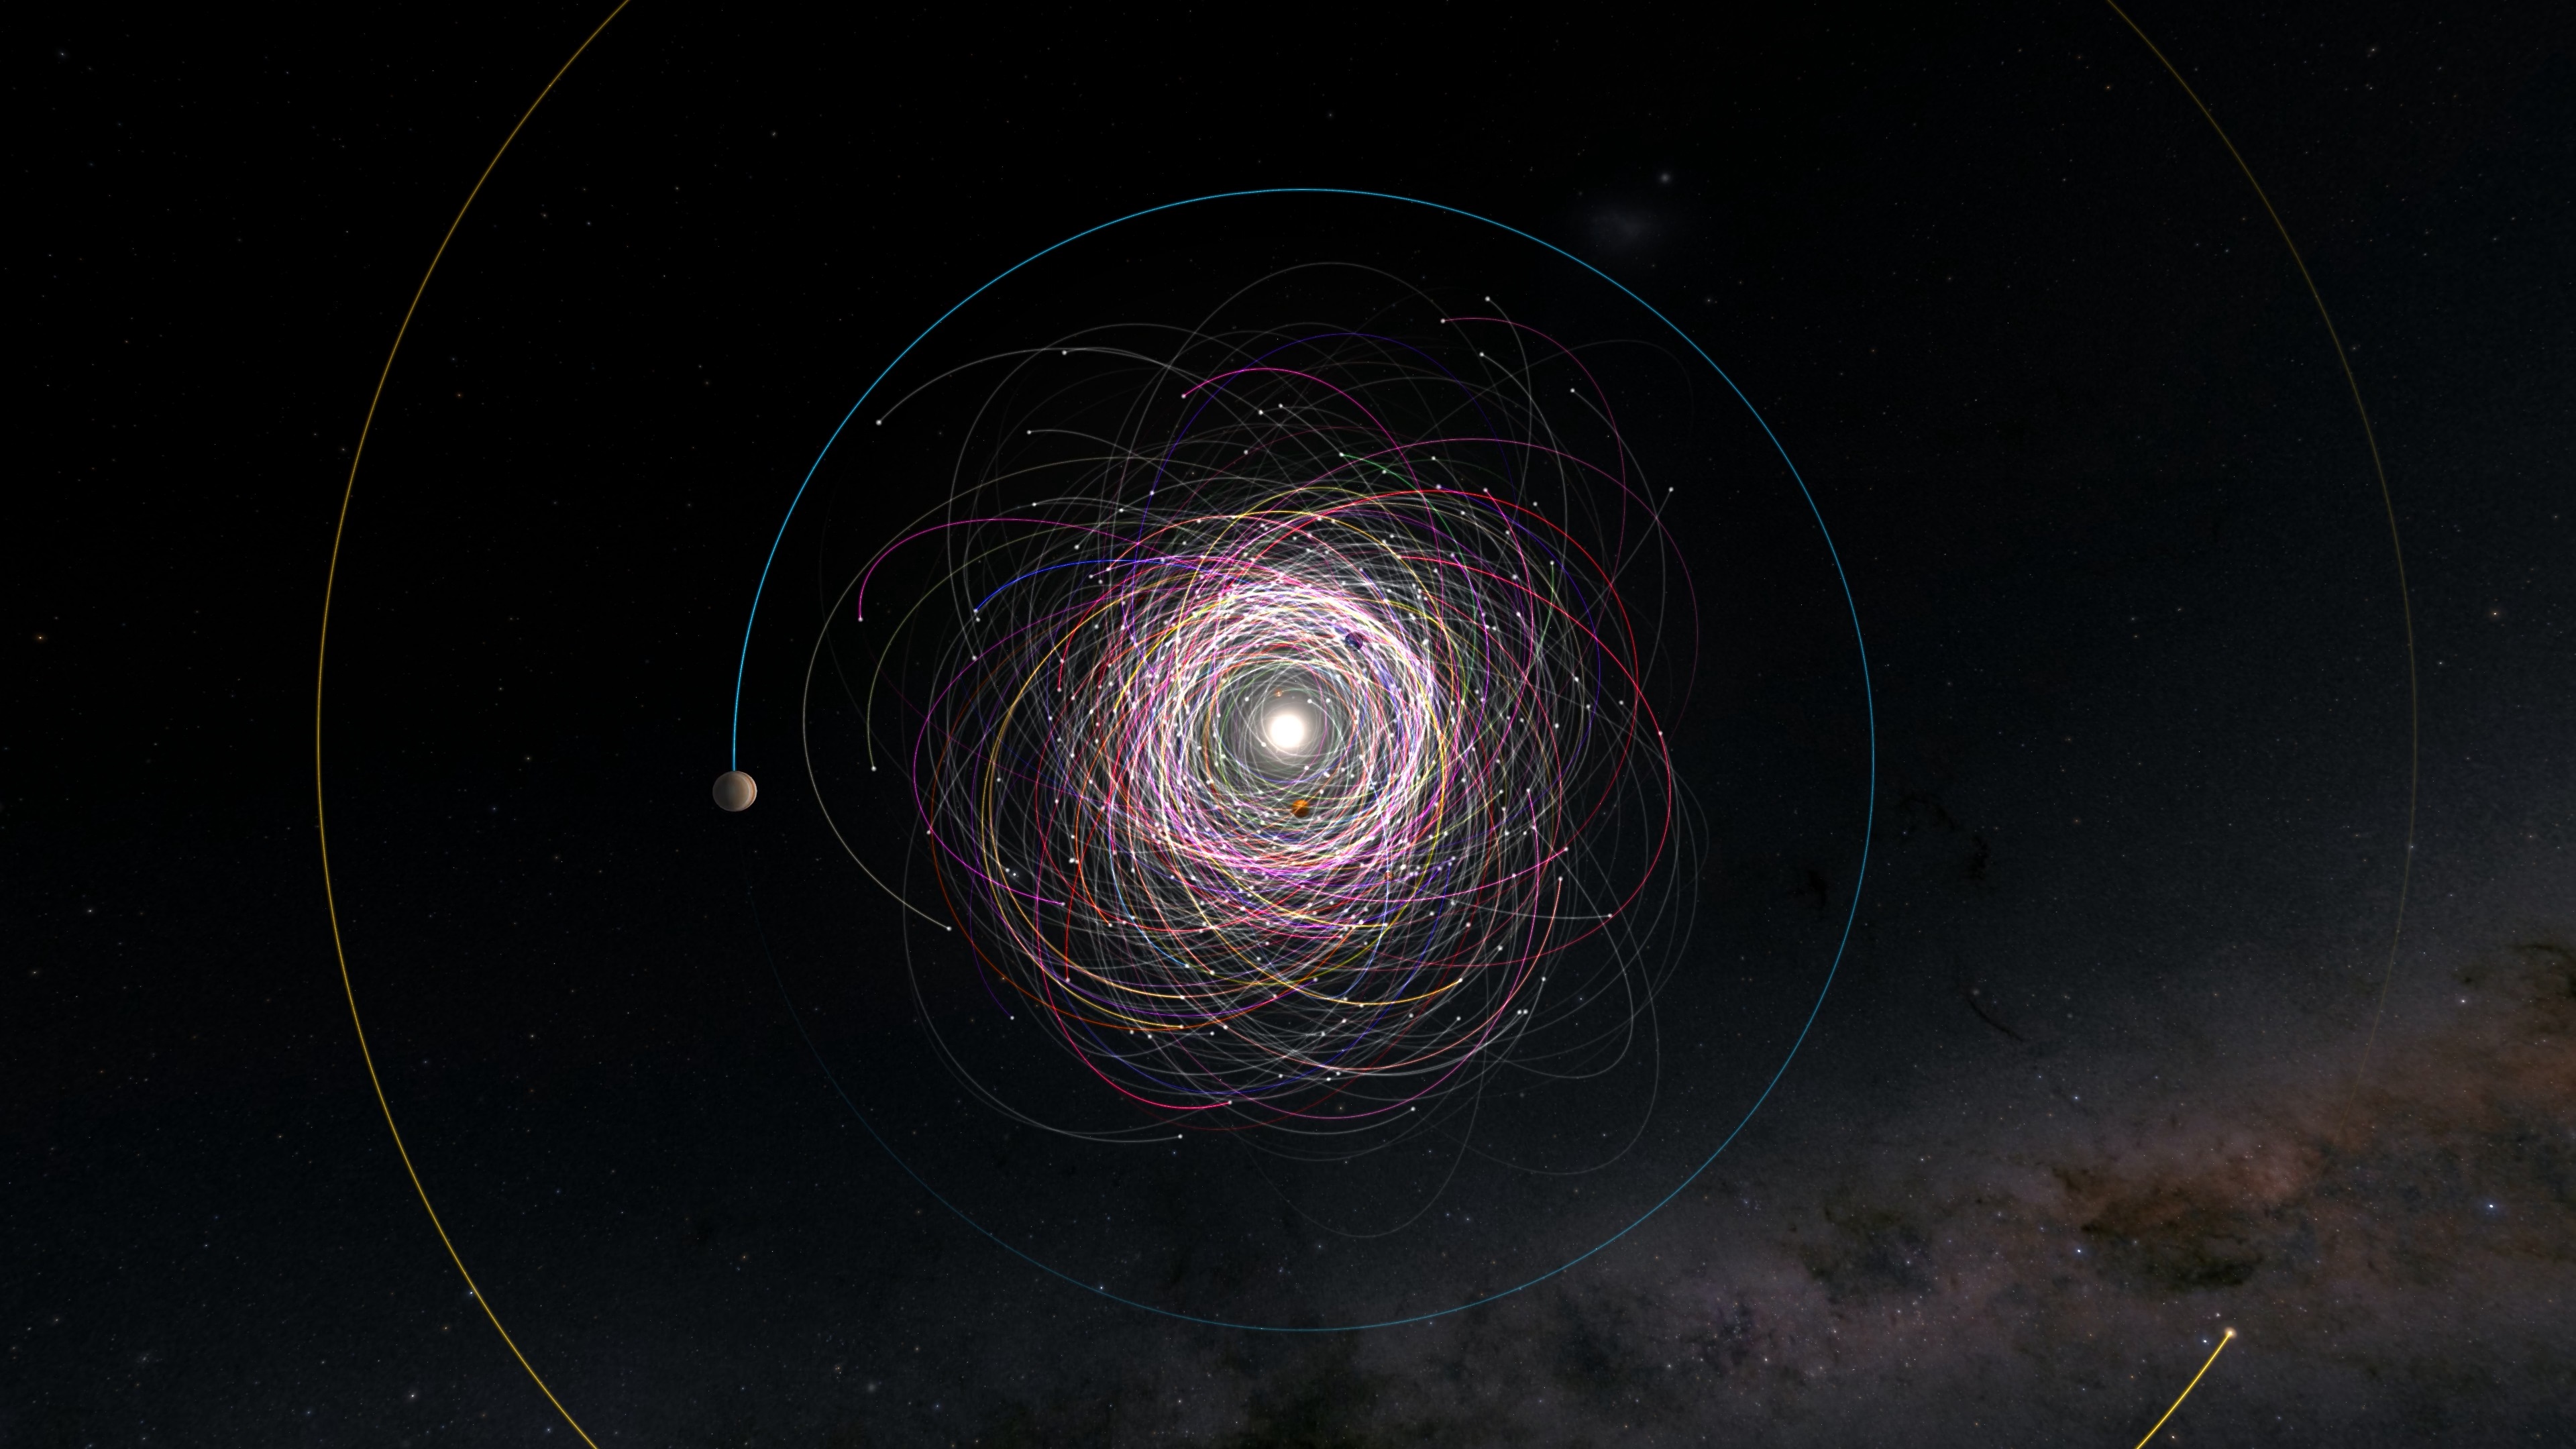 Asteroids measured by the Gaia mission